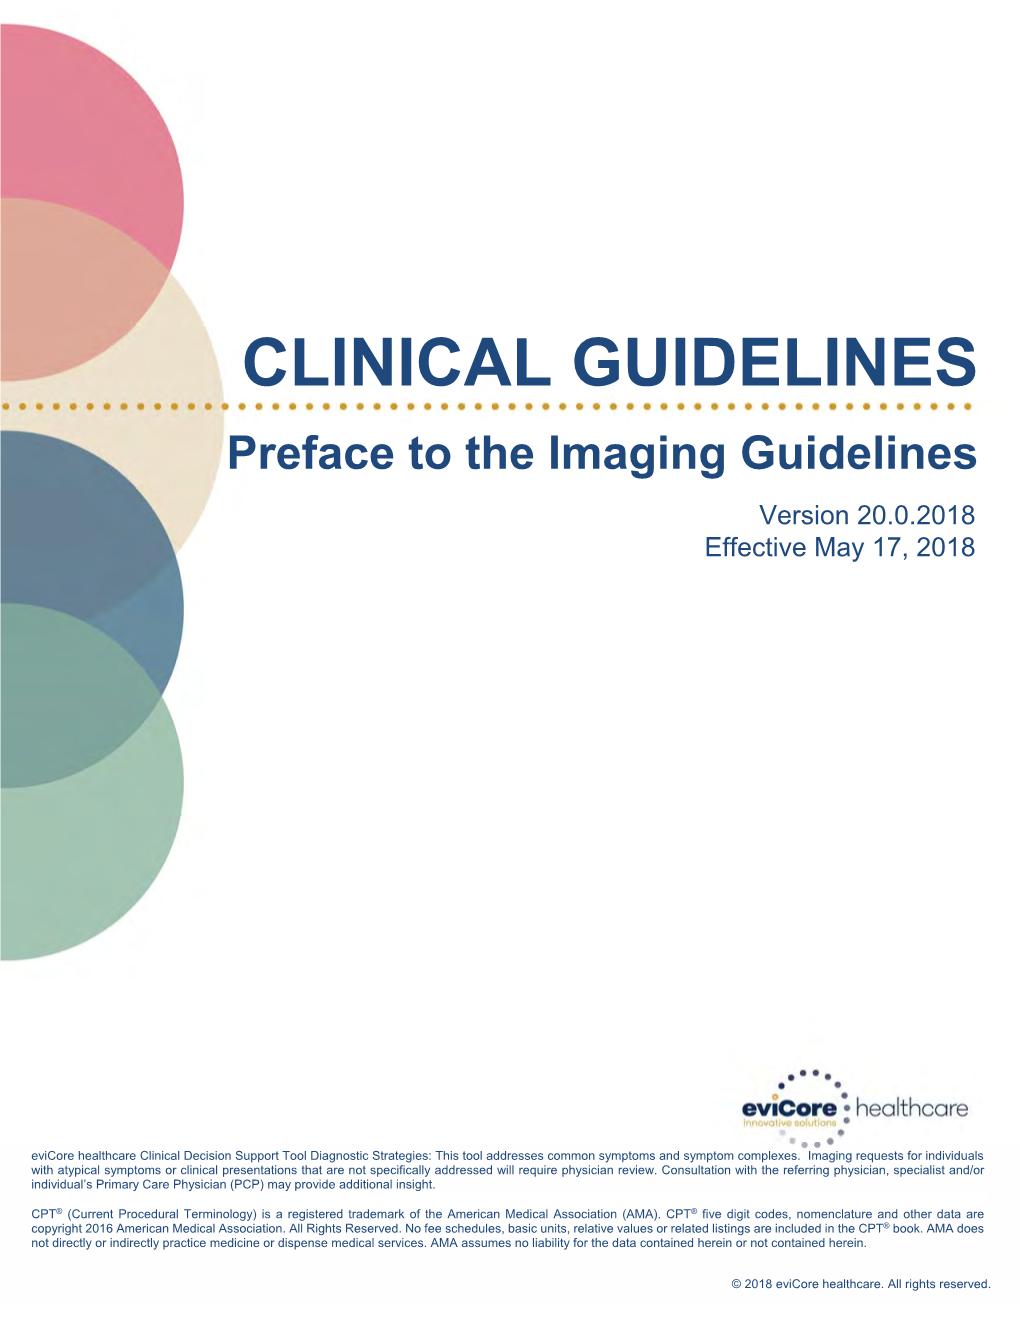 Evicore Preface to the Imaging Guidelines V20.0.2018 Eff 05.17.18